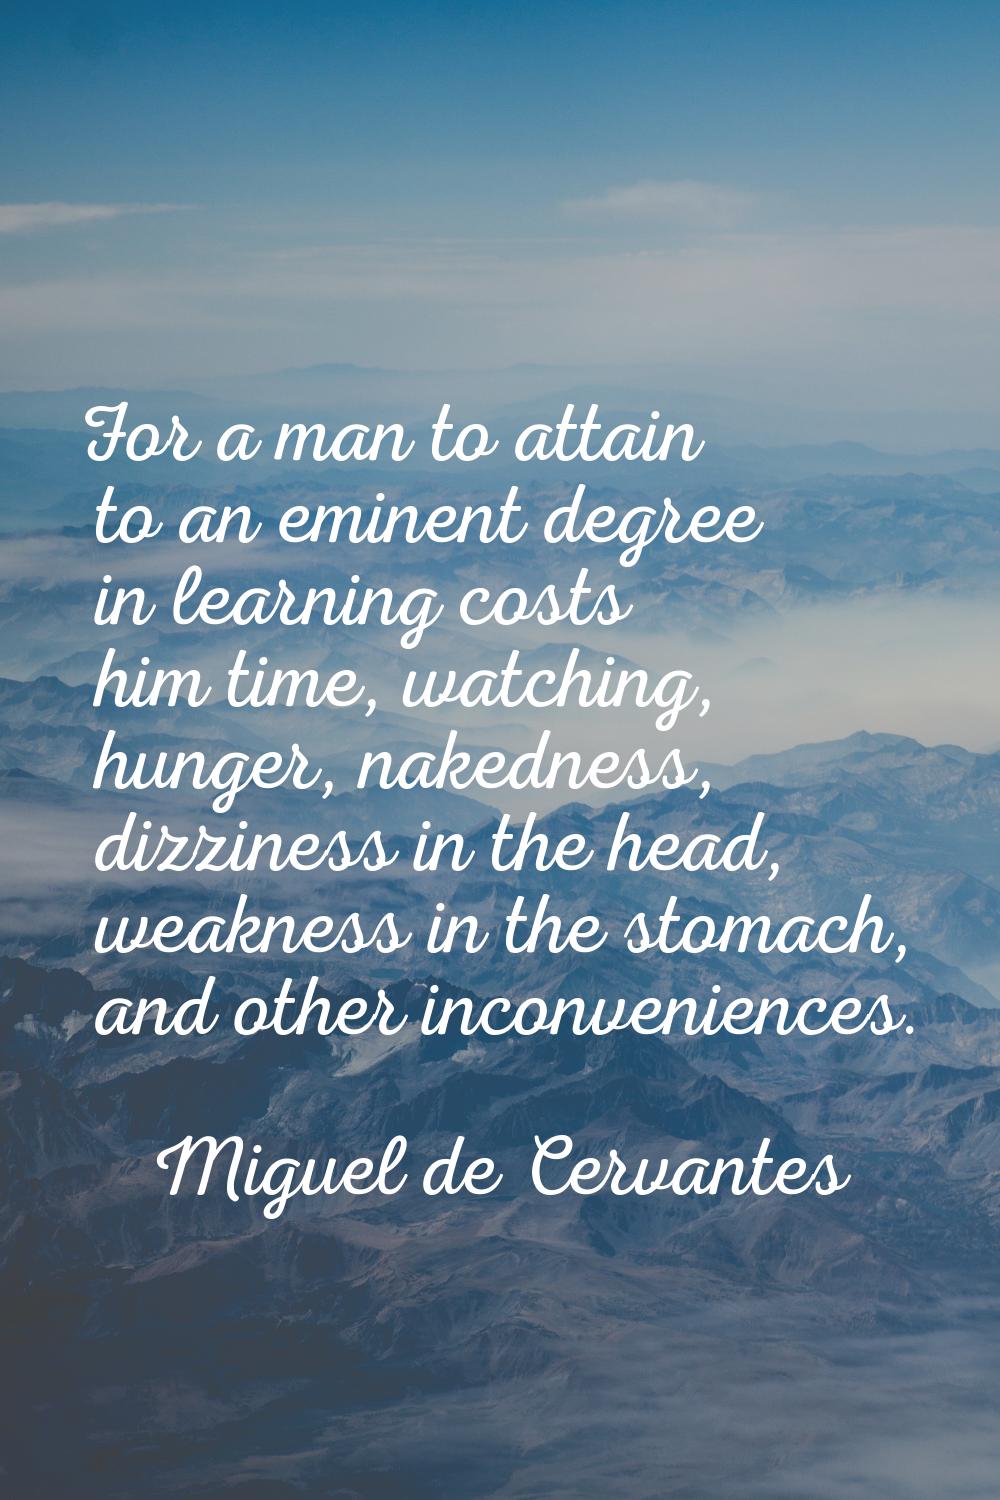 For a man to attain to an eminent degree in learning costs him time, watching, hunger, nakedness, d